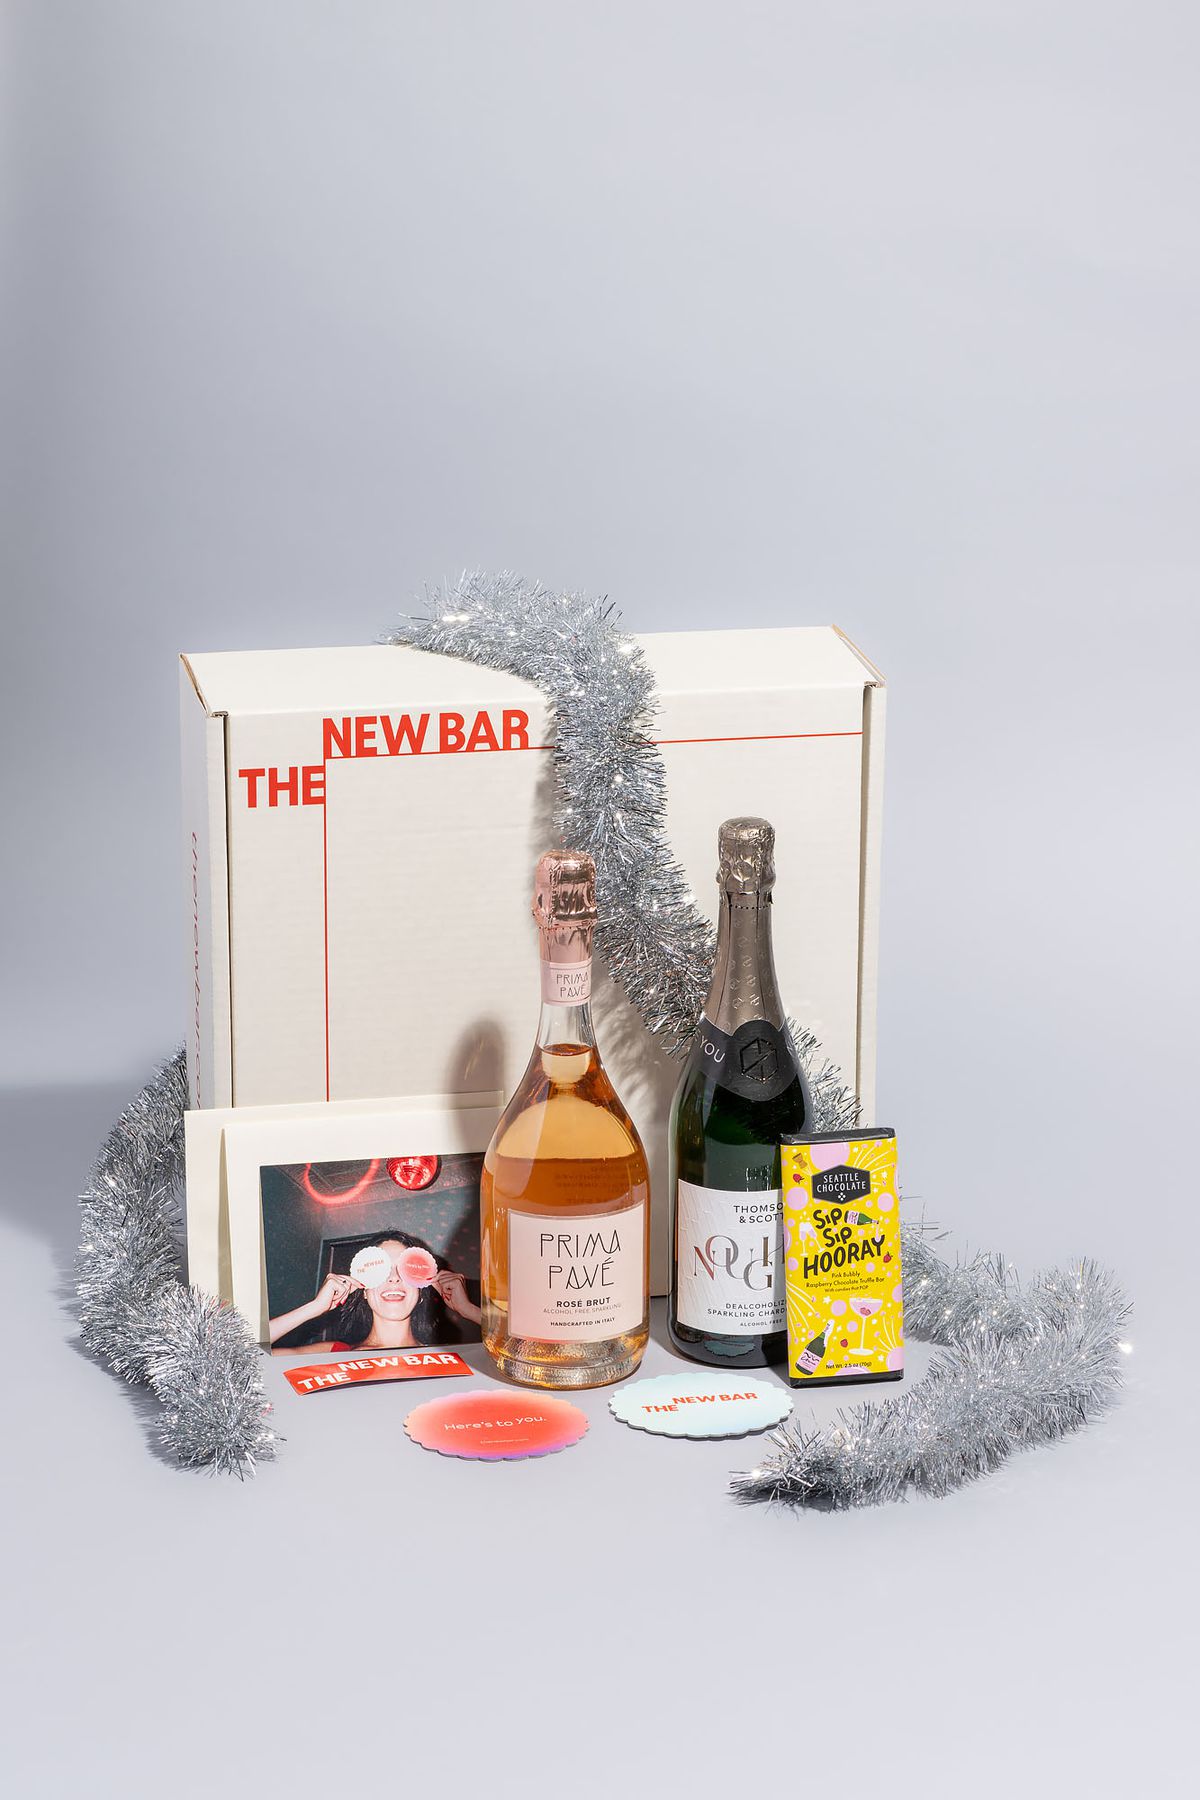 A gift set from the New Bar with two bottles of sparkling nonalcoholic wine and a yellow chocolate bar in front of a white box wrapped in tinsel.